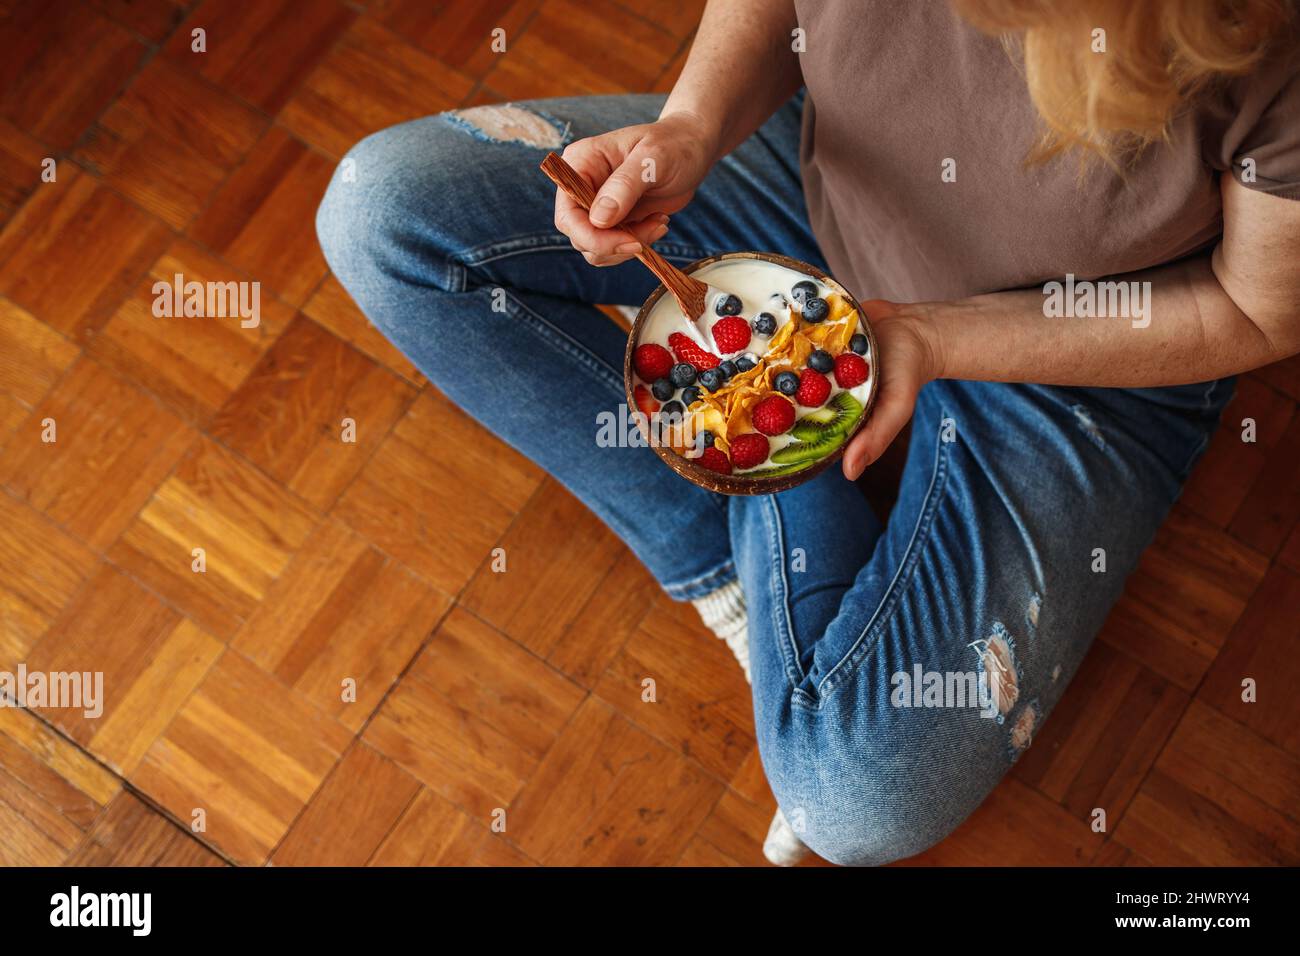 Healthy breakfast at home. Woman sitting on floor and eating yoghurt with fruit and corn flakes. Vegetarian food Stock Photo